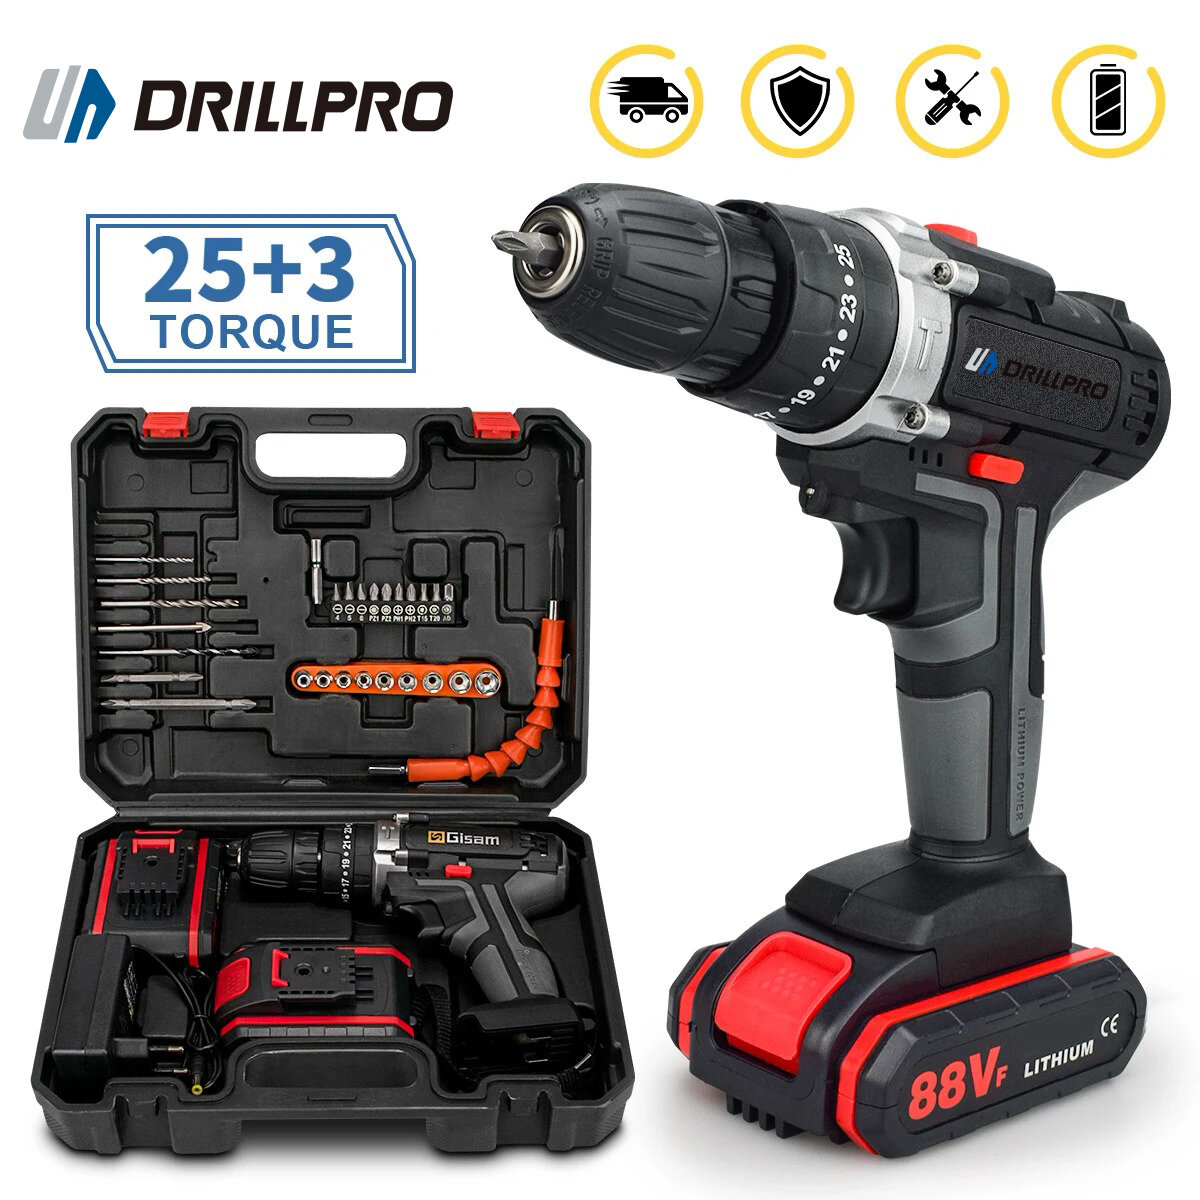 

Drillpro Cordless Impact Drill 21V Li-Ion Battery Powered High Torque Drill with 25+3 Clutch Settings Keyless Chuck LED